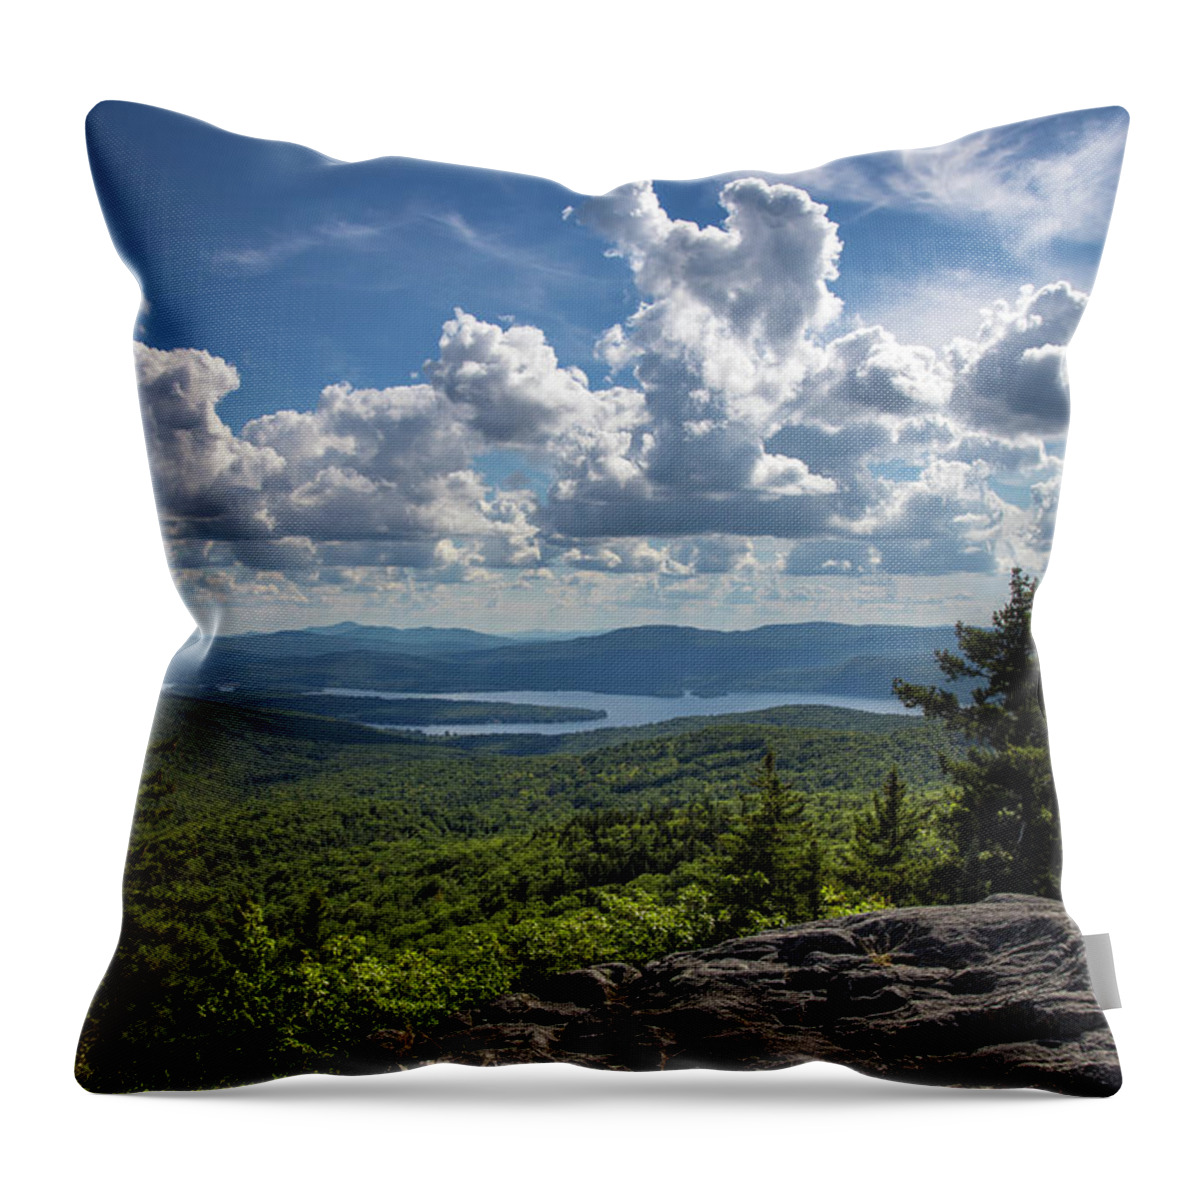 Newfound Throw Pillow featuring the photograph Newfound Lake Summer by White Mountain Images